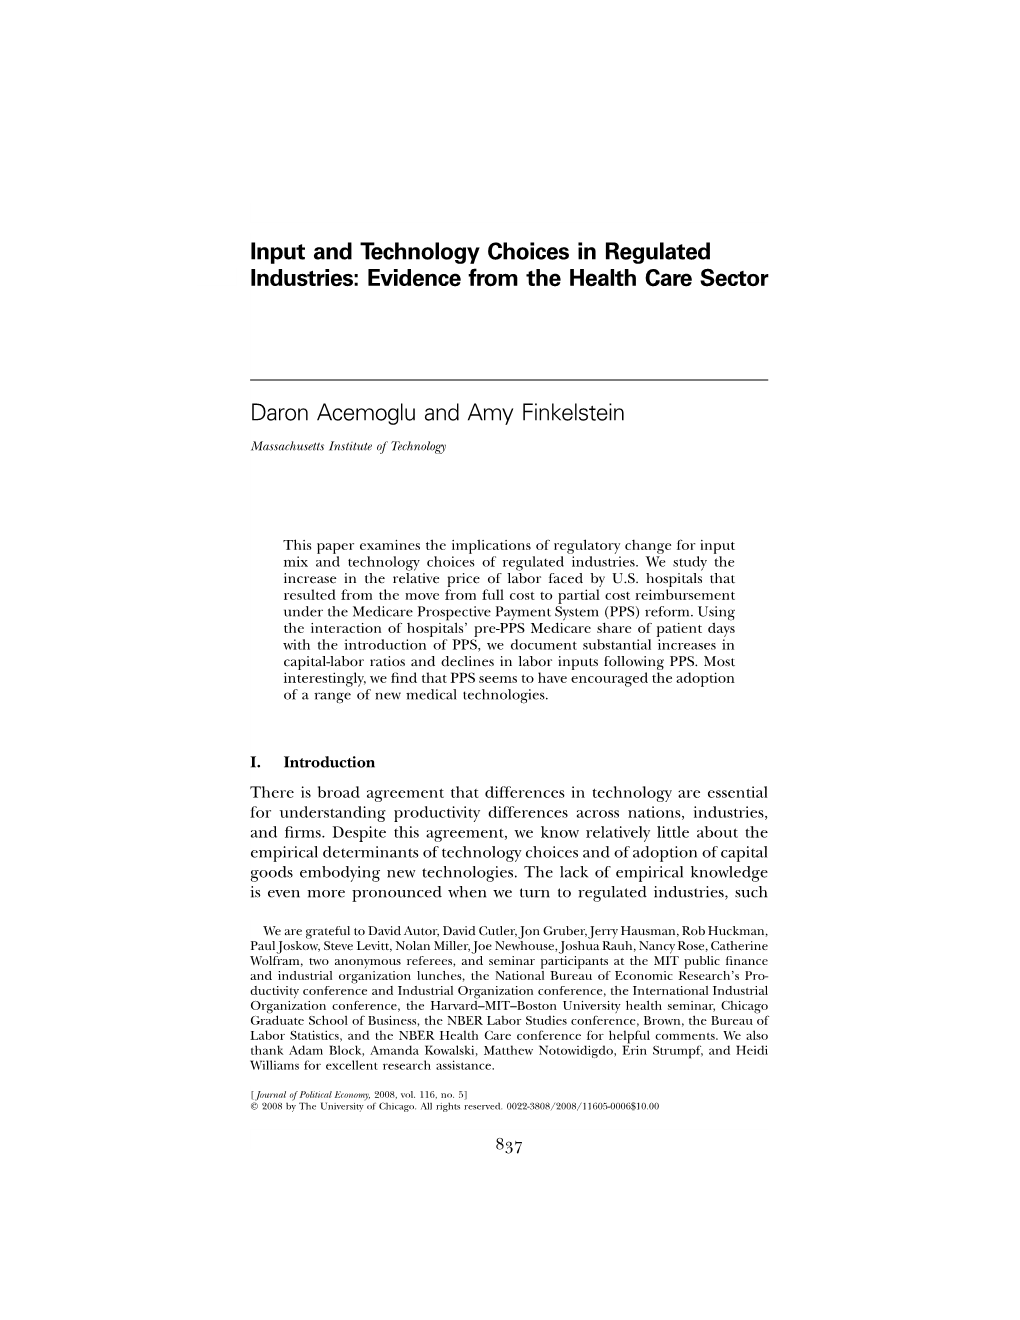 Input and Technology Choices in Regulated Industries: Evidence from the Health Care Sector